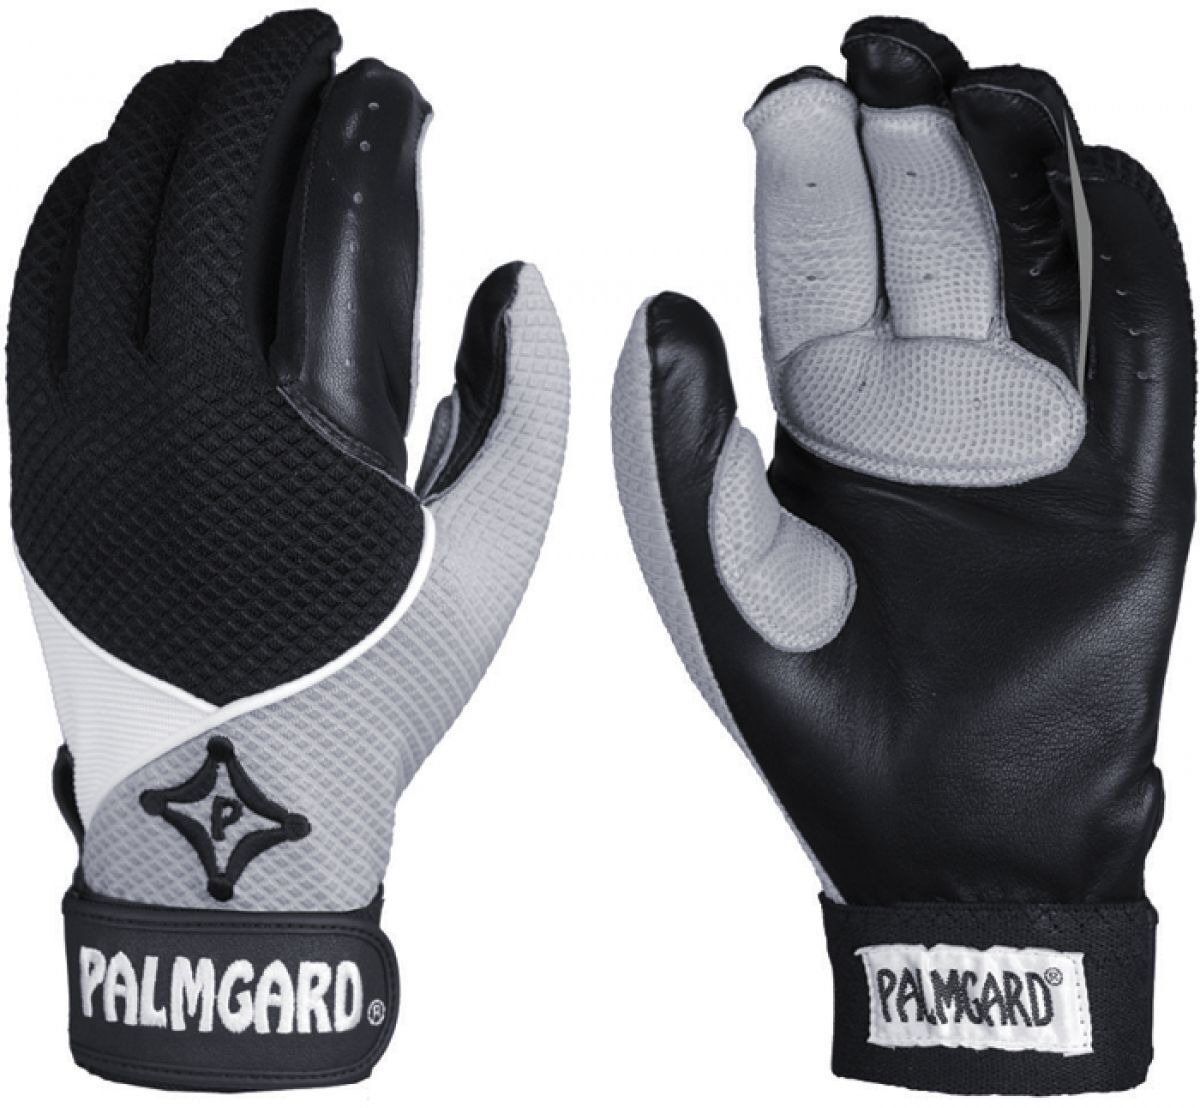 Palmgard Protective Inner Glove Xtra Adult Left Hand Large PGPAE101-A-LH-L